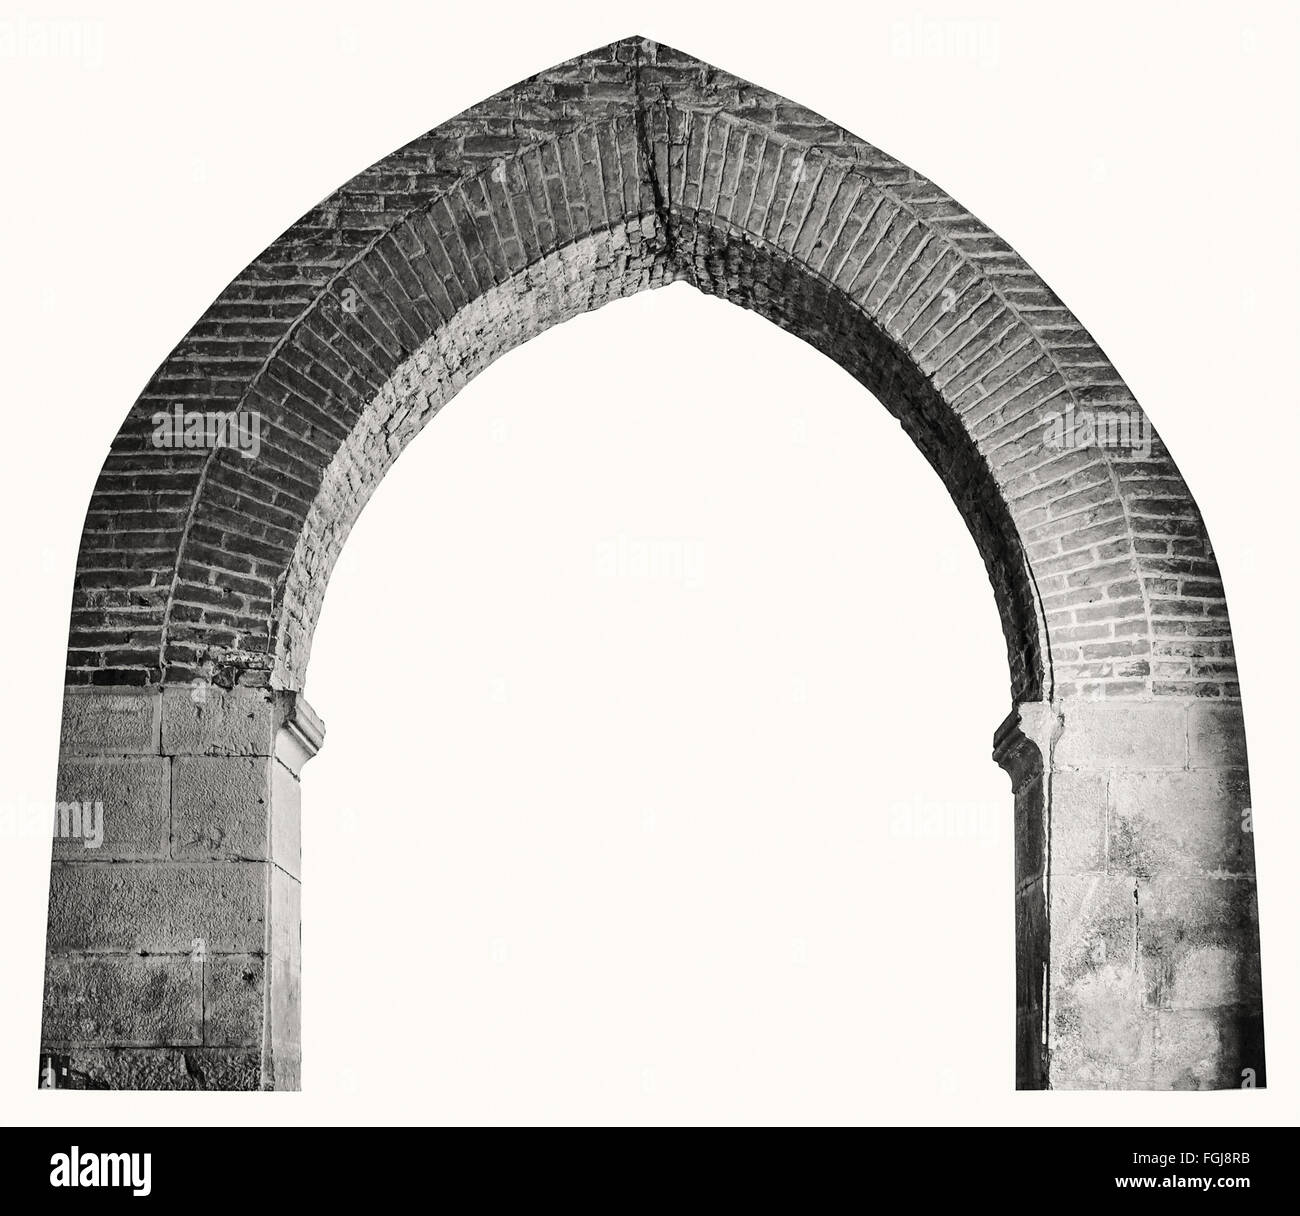 Brick pointed arch suitable as a frame or border. Stock Photo